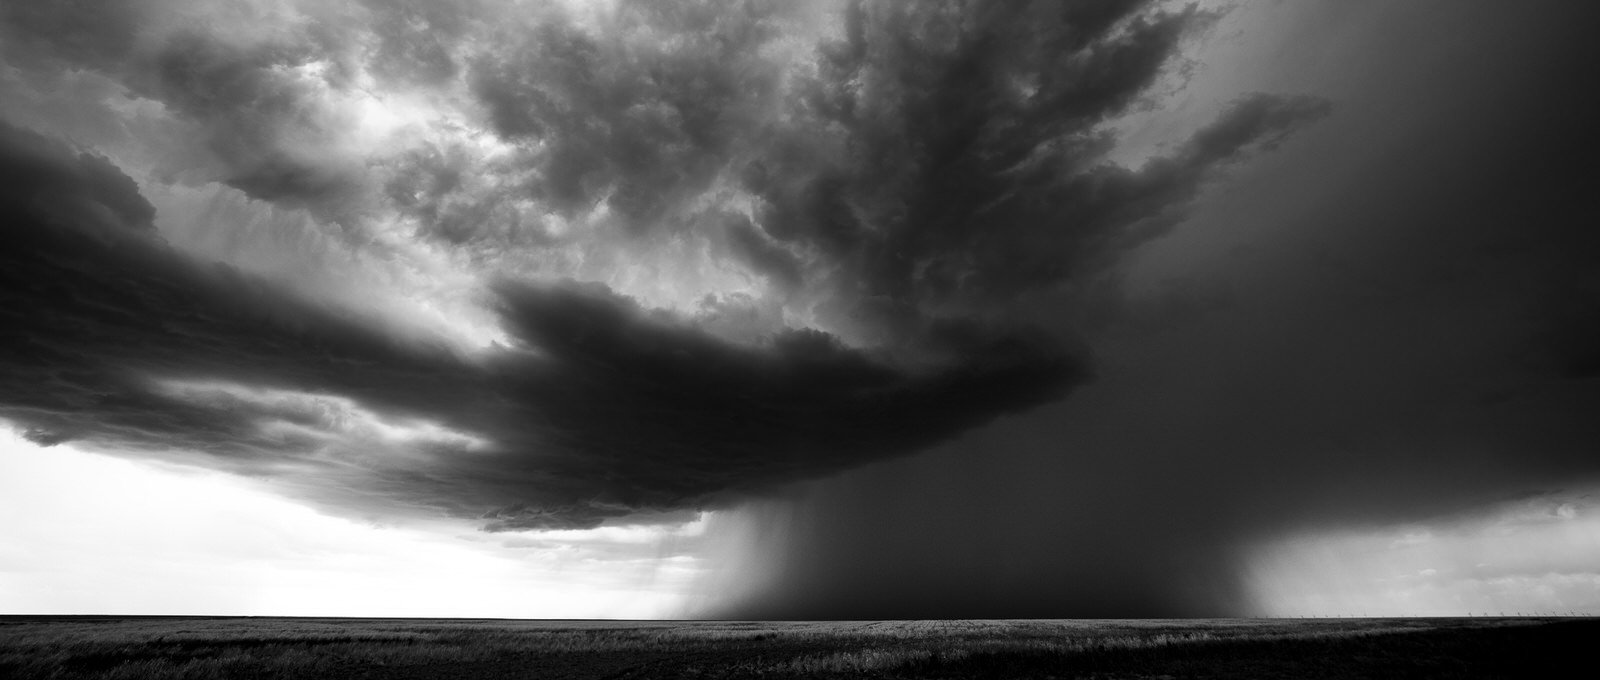 Breathe: An Epic 8K Storm Time-Lapse Film in Black-and-White | PetaPixel